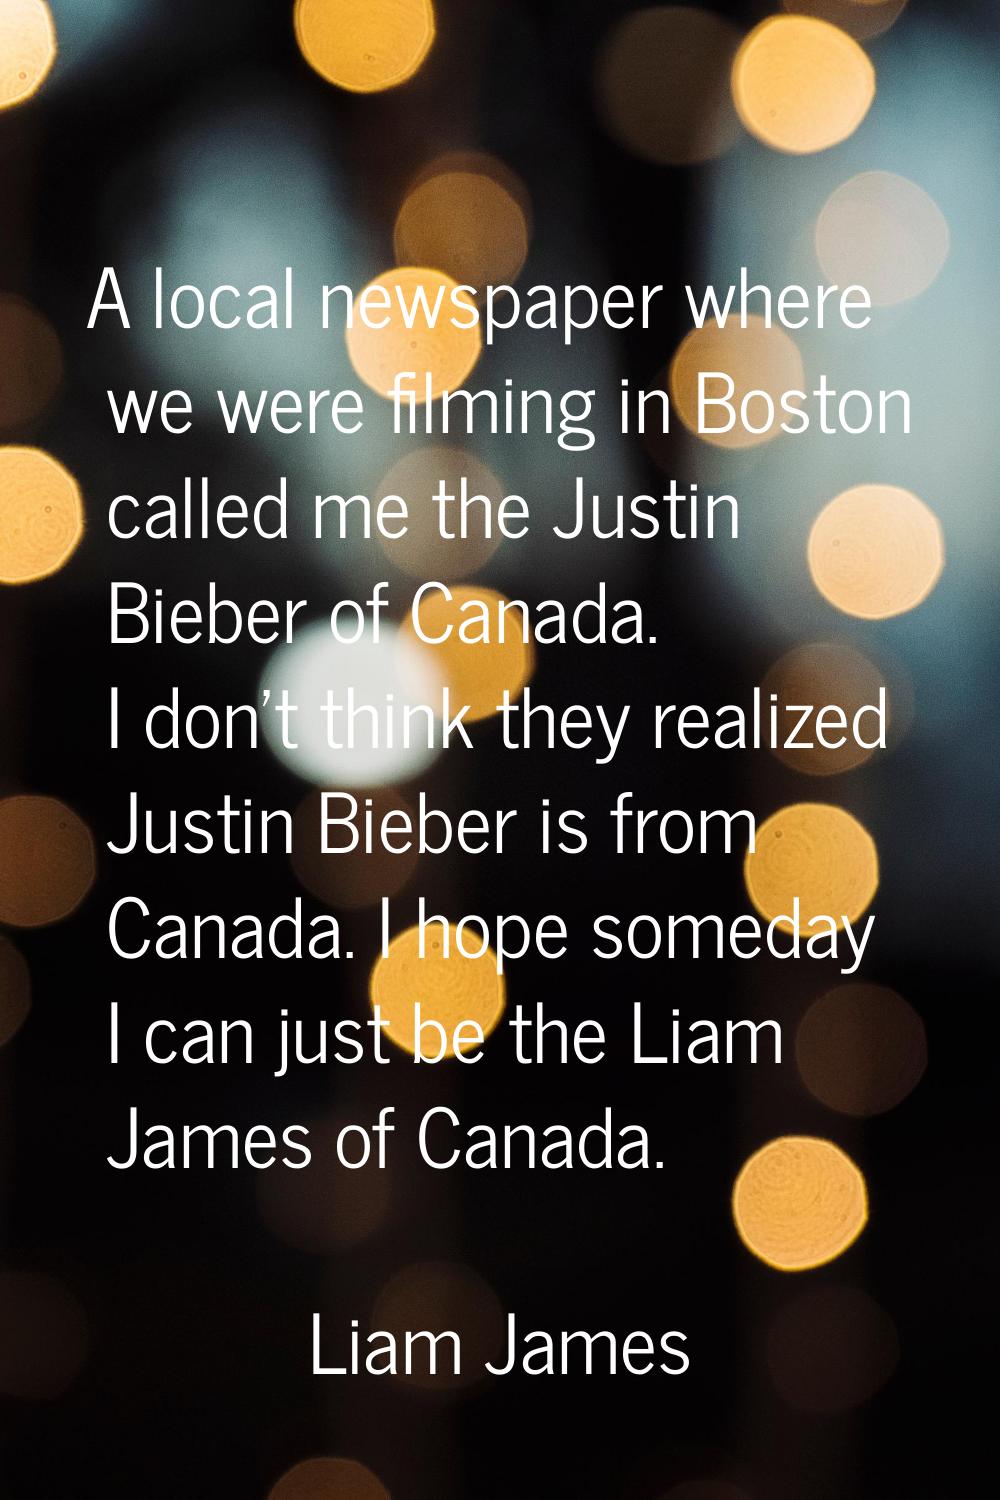 A local newspaper where we were filming in Boston called me the Justin Bieber of Canada. I don't th